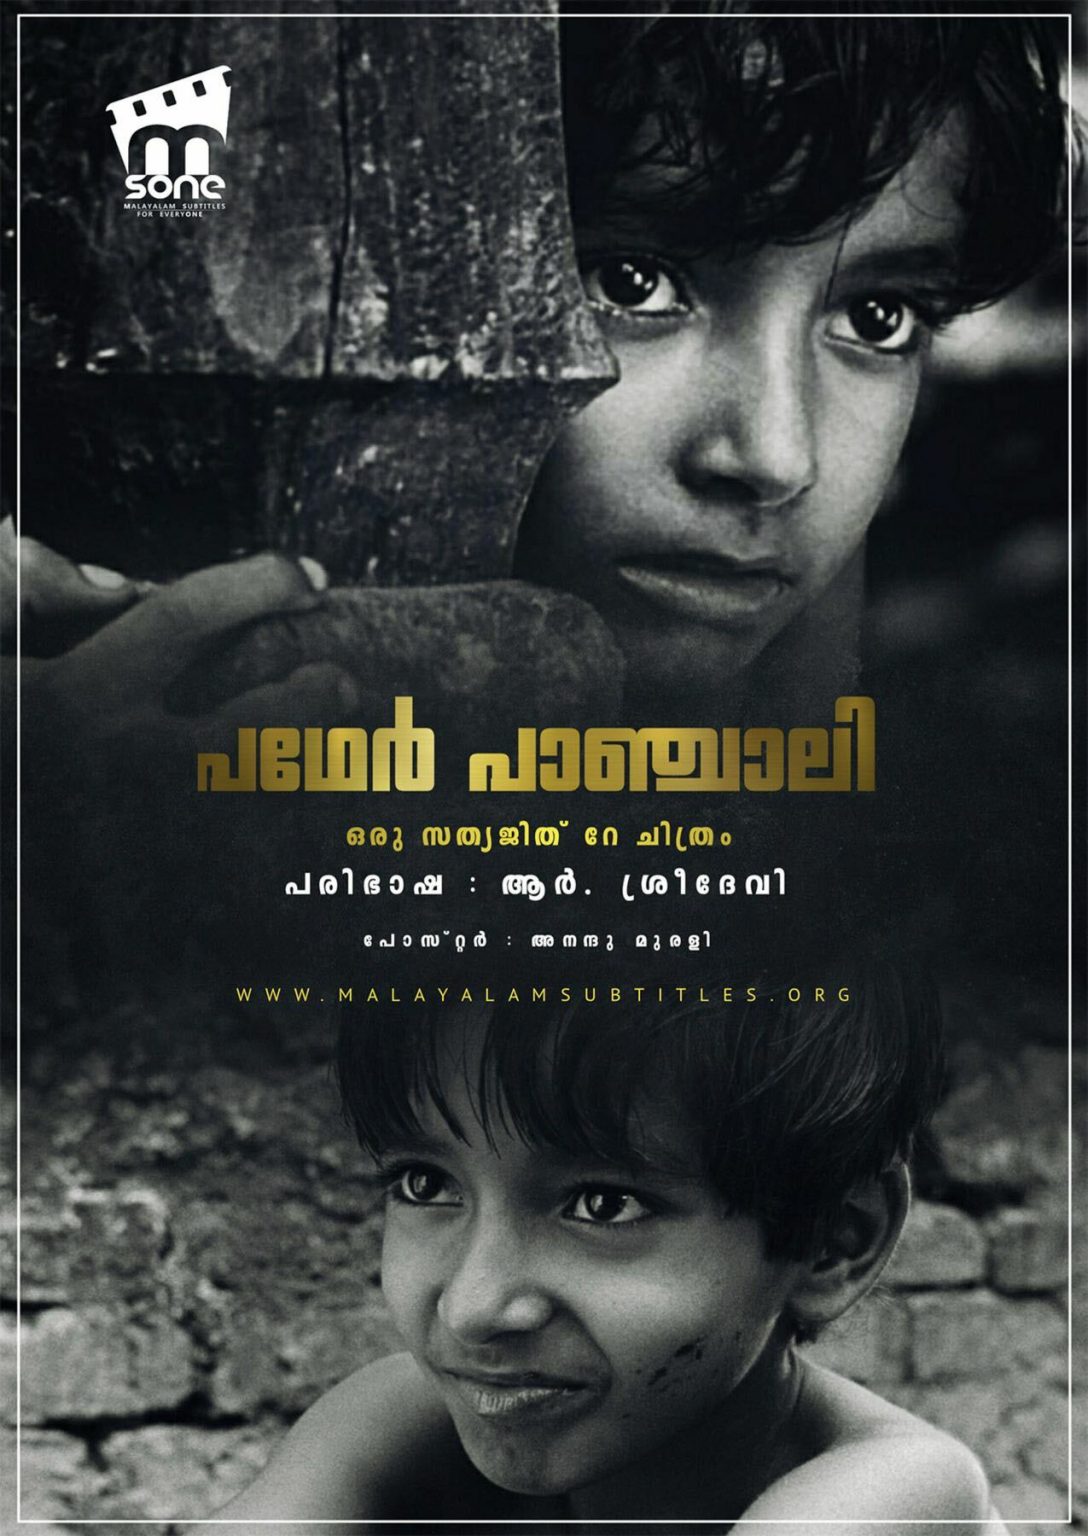 pather panchali full movie download hd